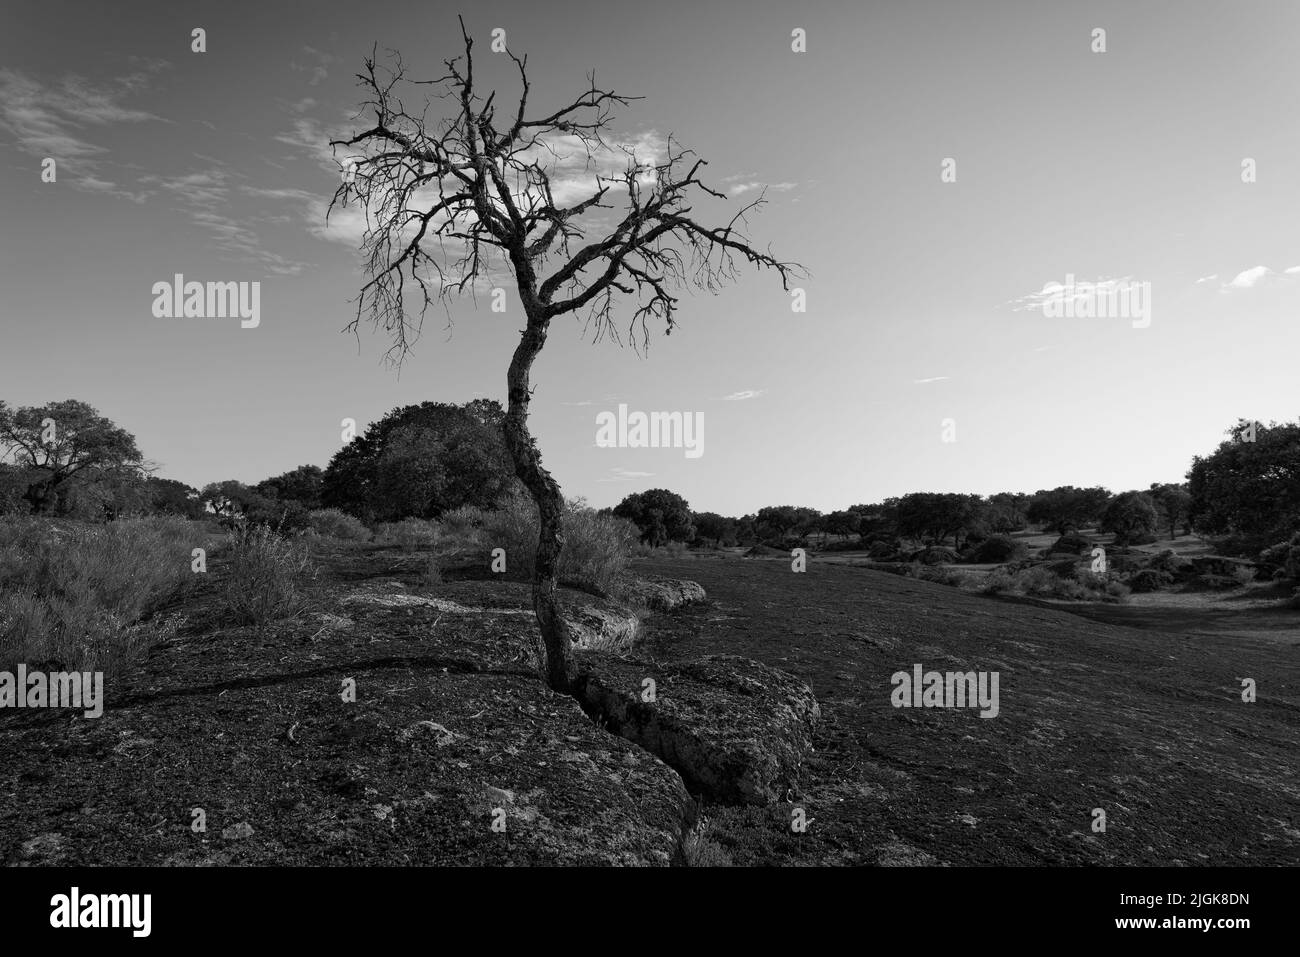 Broken tree in forest Black and White Stock Photos & Images - Alamy